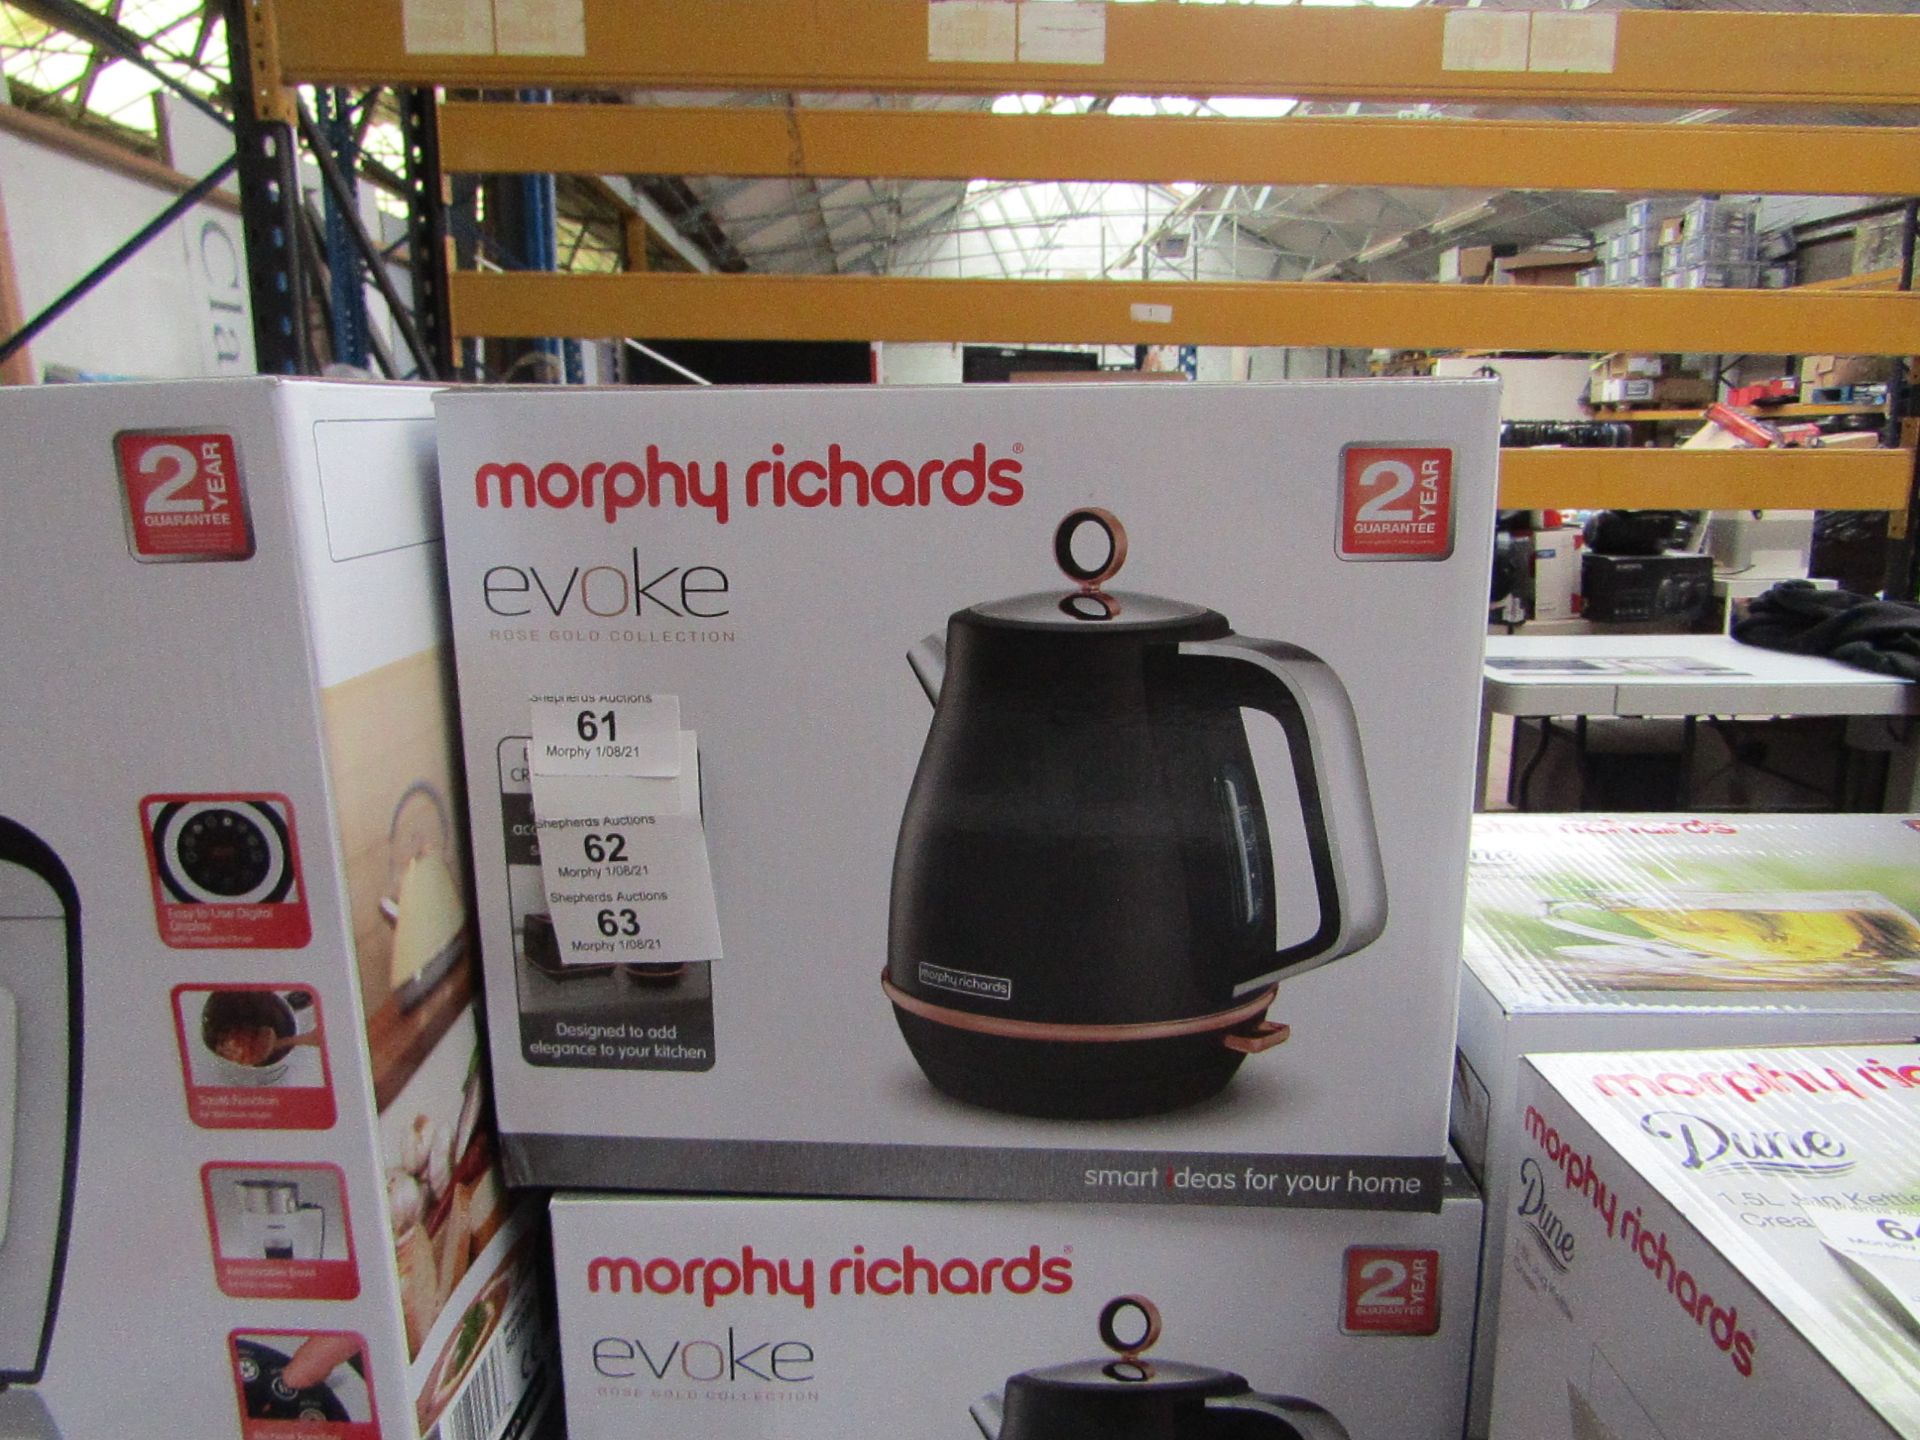 Morphy Richards Illumination 1.7L jug kettle in black, brand new and boxed. RRP £39.99